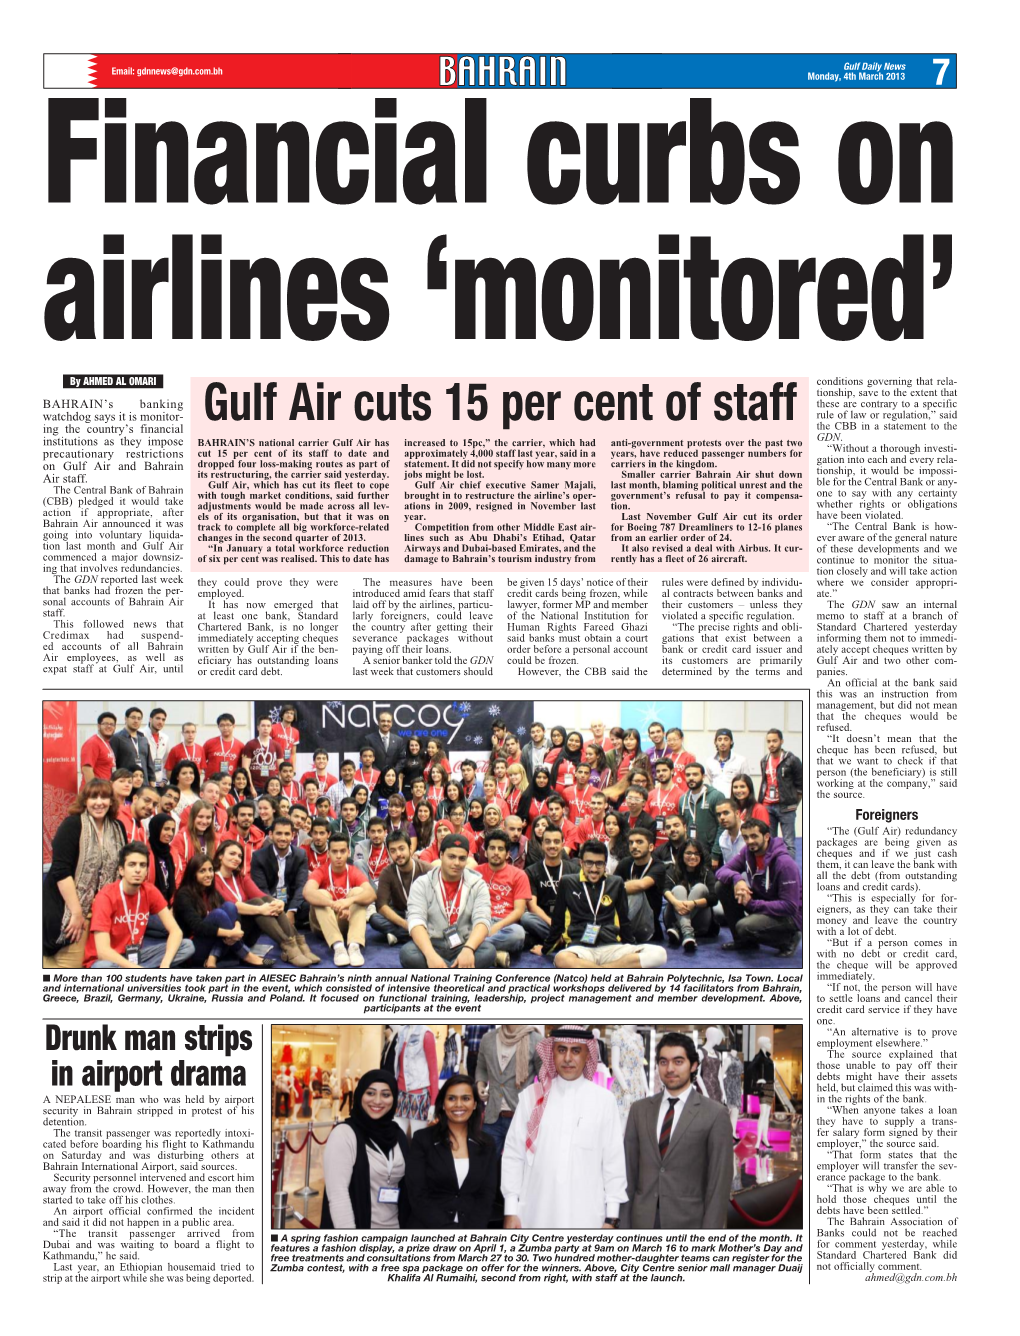 Gulf Air Cuts 15 Per Cent of Staff Rule of Law Or Regulation,” Said Ing the Country’S Financial the CBB in a Statement to the GDN